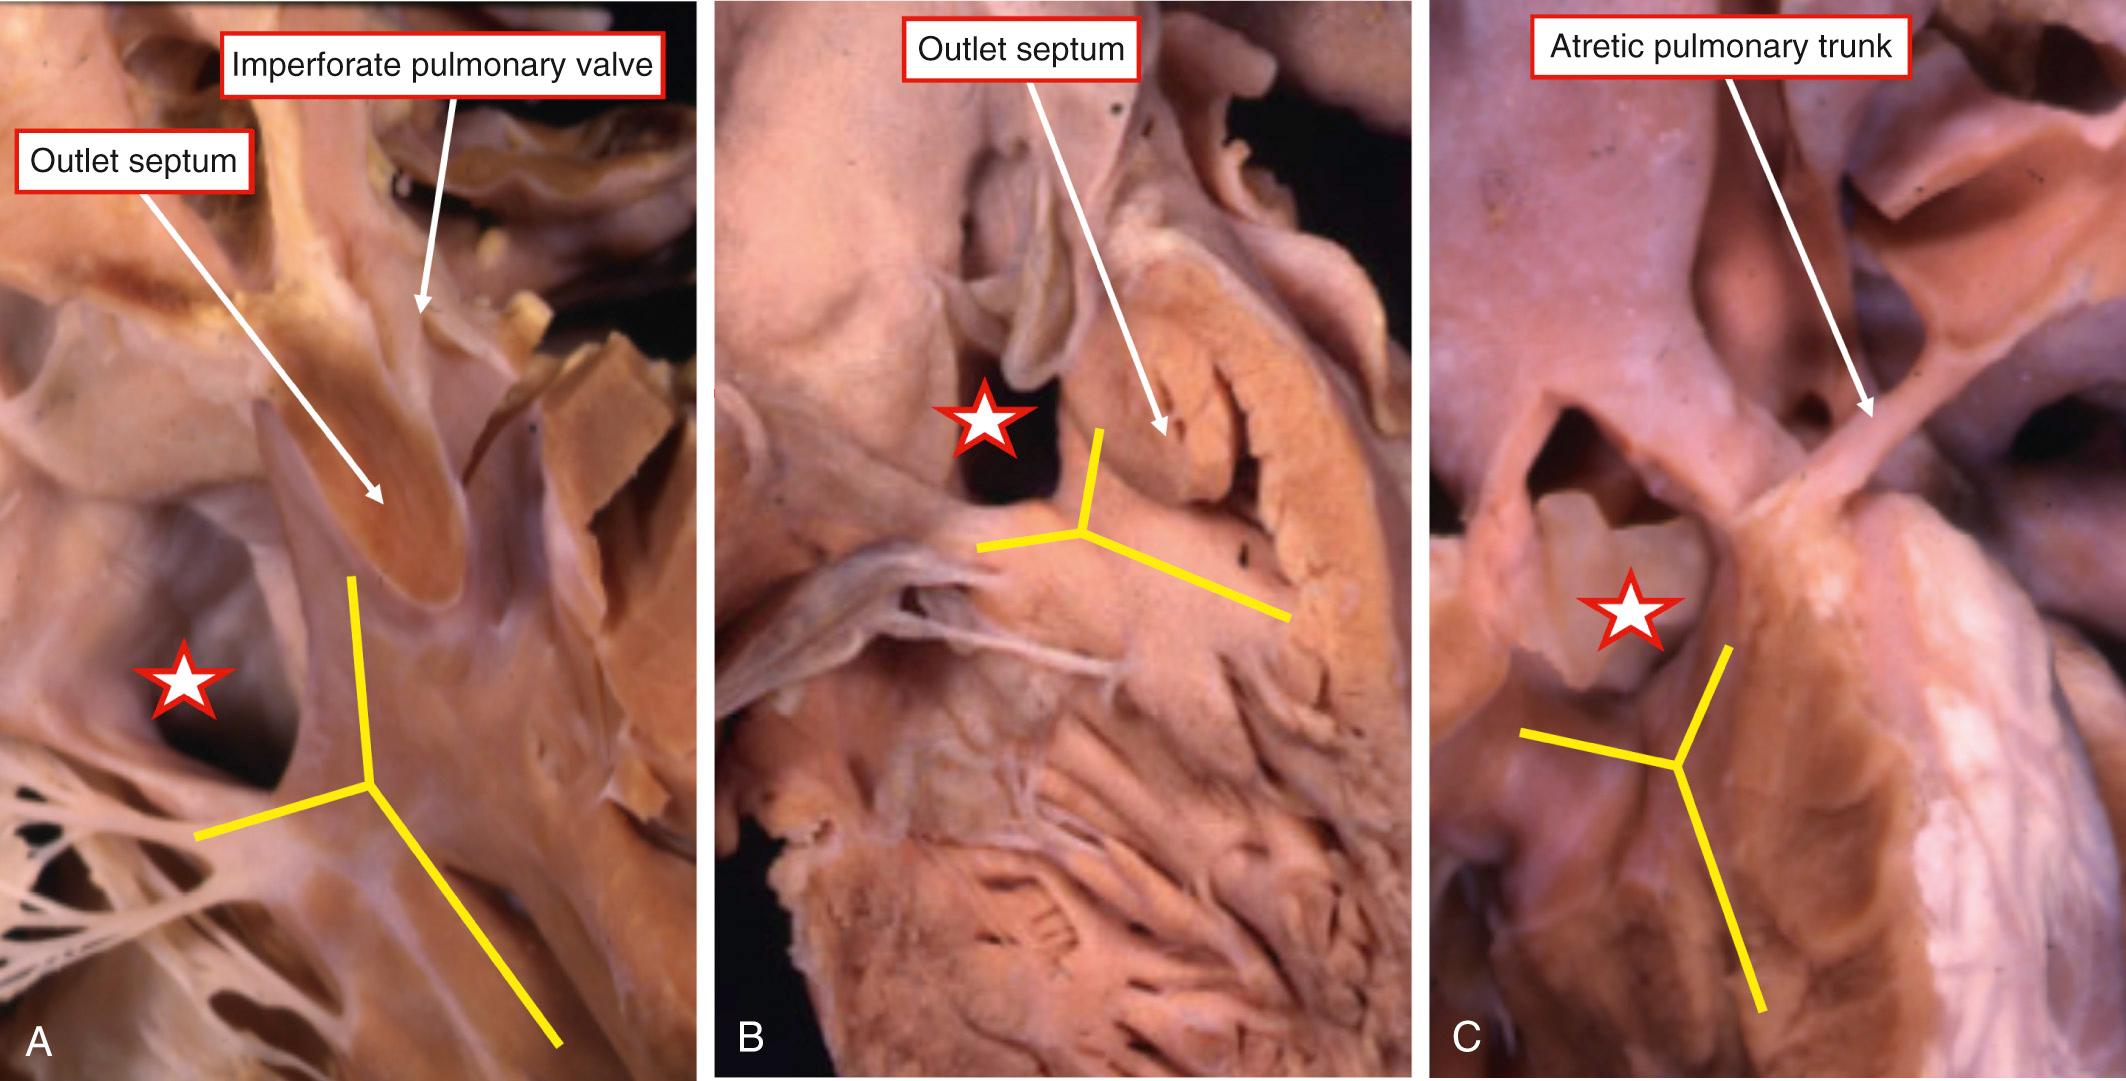 Fig. 36.2, Varying intracardiac morphology to be found in the setting of tetralogy of Fallot with pulmonary atresia. (A–B) In these hearts the muscular outlet septum is attached to the cranial limb of the septomarginal trabeculation (yellow bars) . The pulmonary valve is imperforate in (A), whereas the atresia is muscular in (B). (C) Heart with an atretic pulmonary trunk but no evidence of formation of the subpulmonary infundibulum. The ventricular septal defect (star) is perimembranous in (A), has a muscular posteroinferior rim in (B), and is doubly committed and juxta-arterial in (C).